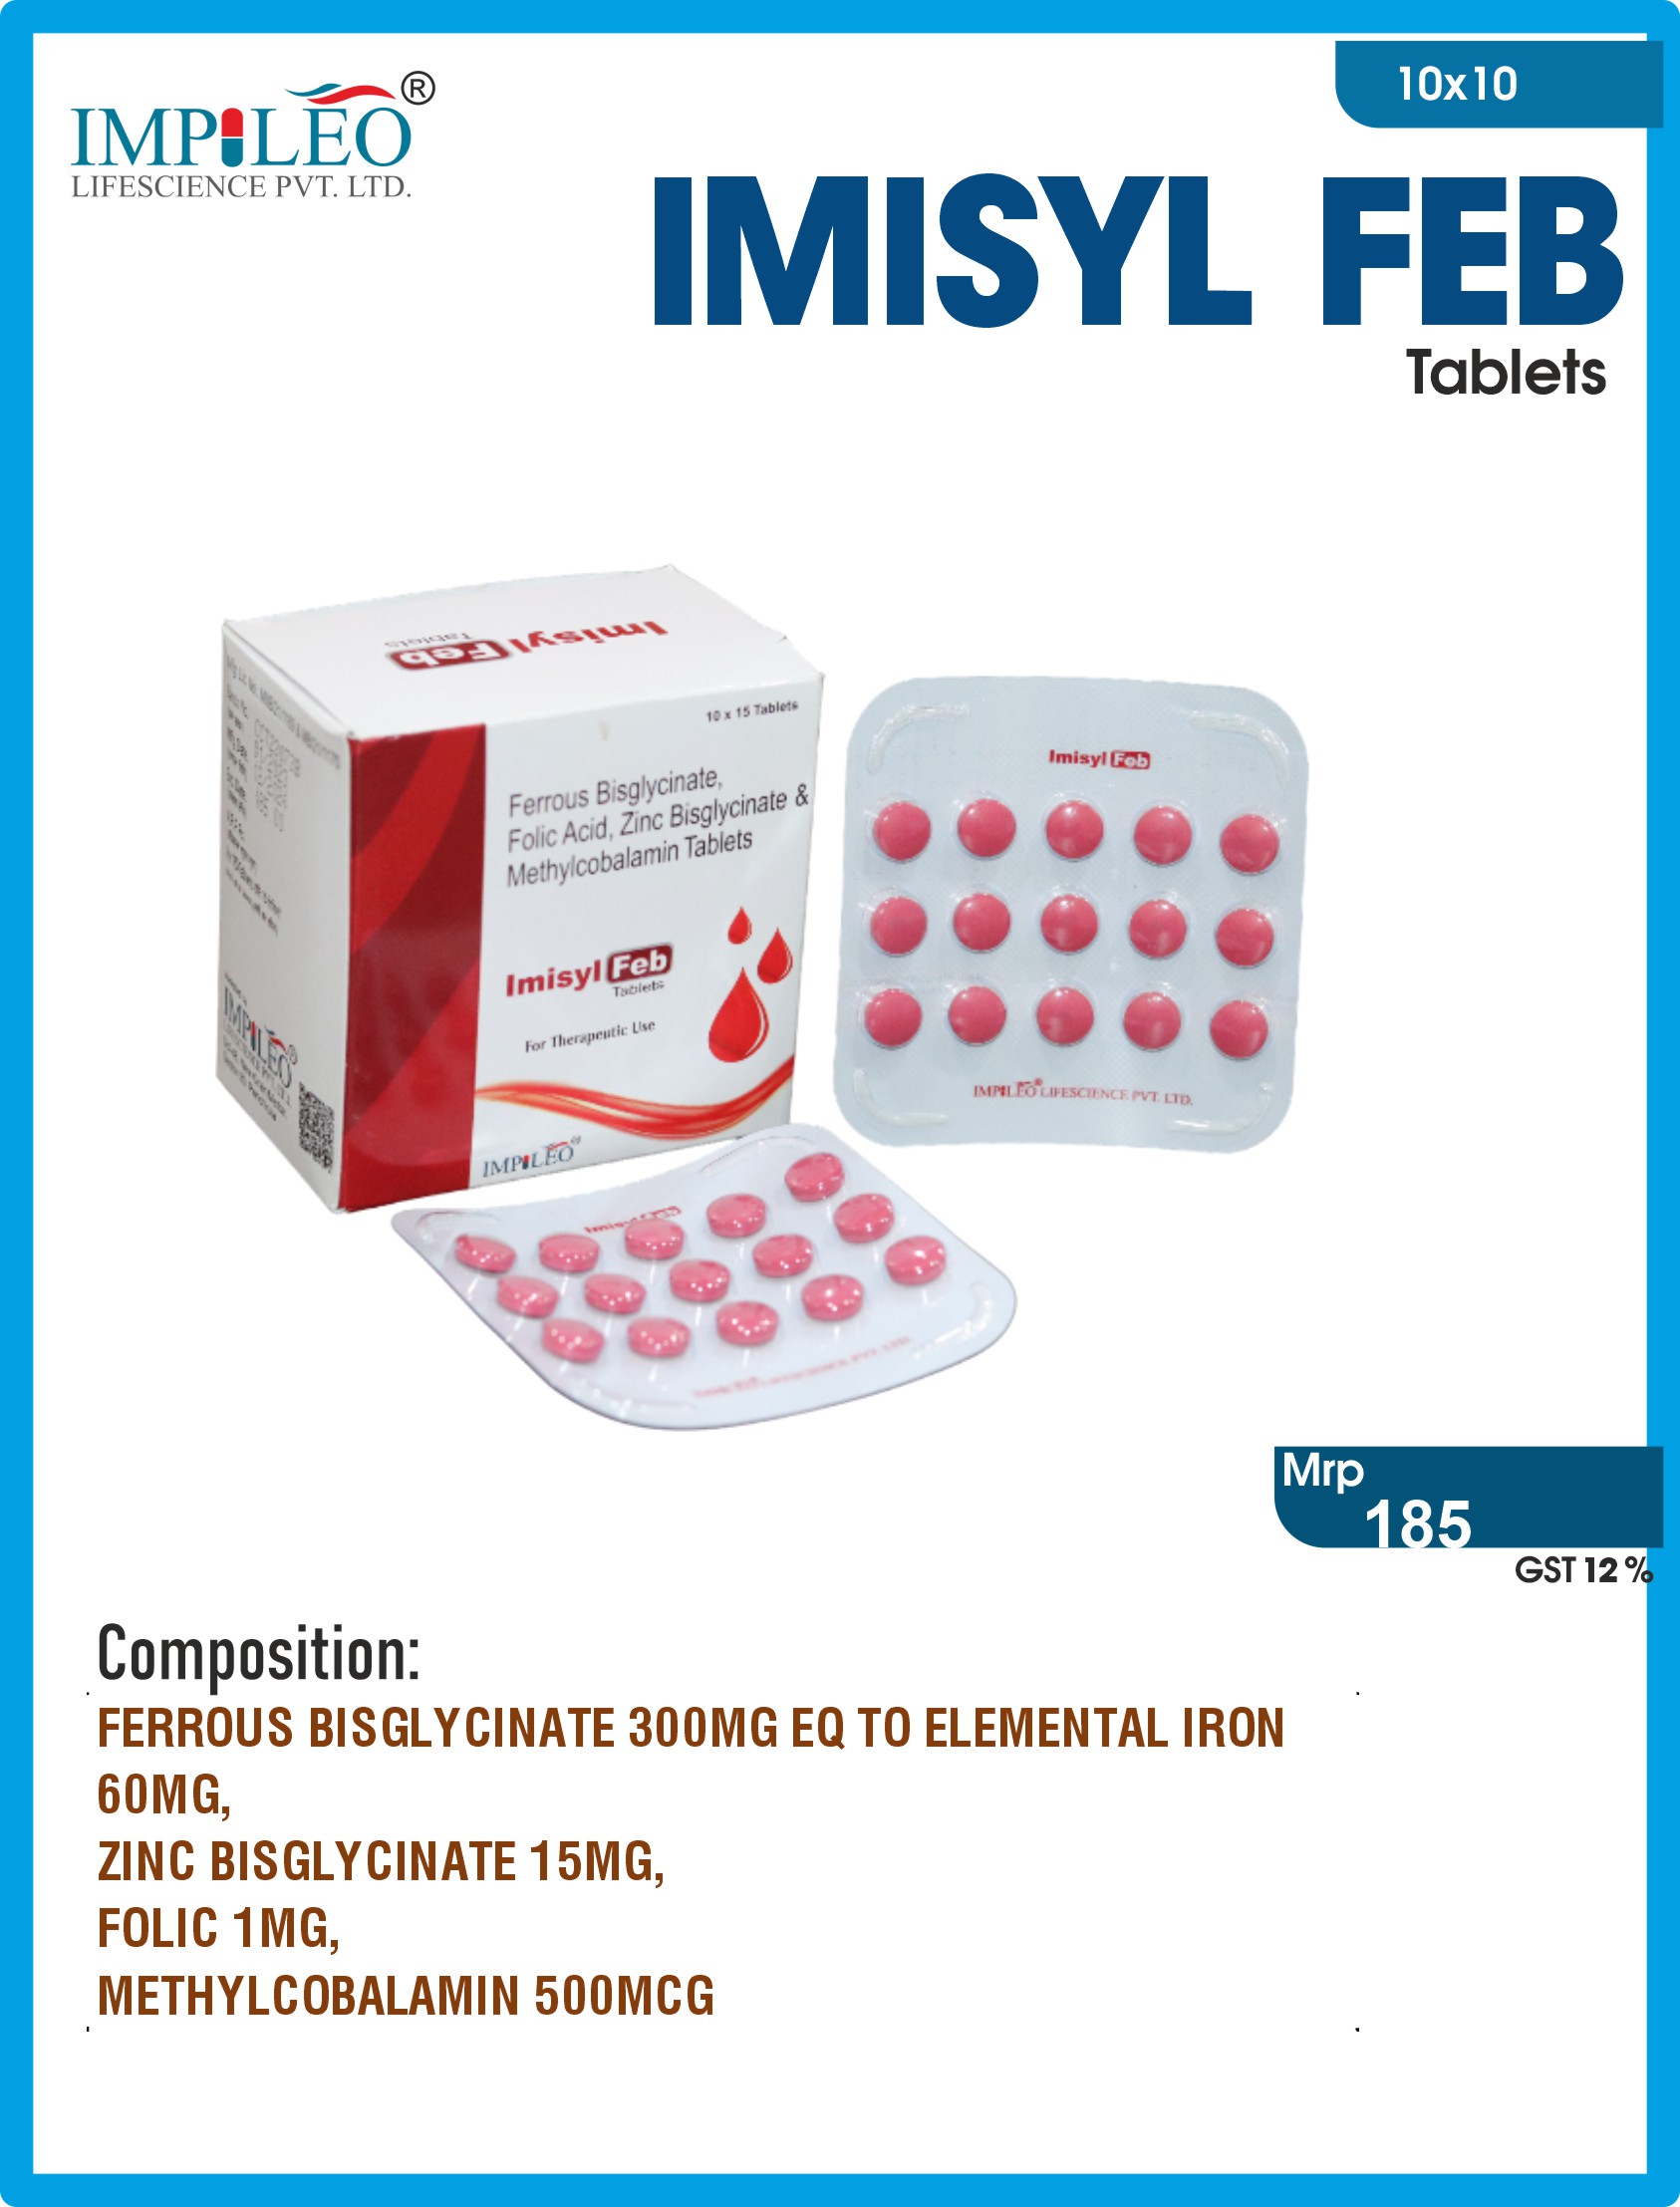 IMISYL FEB Tablets Offered by PCD Pharma Franchise in Chandigarh